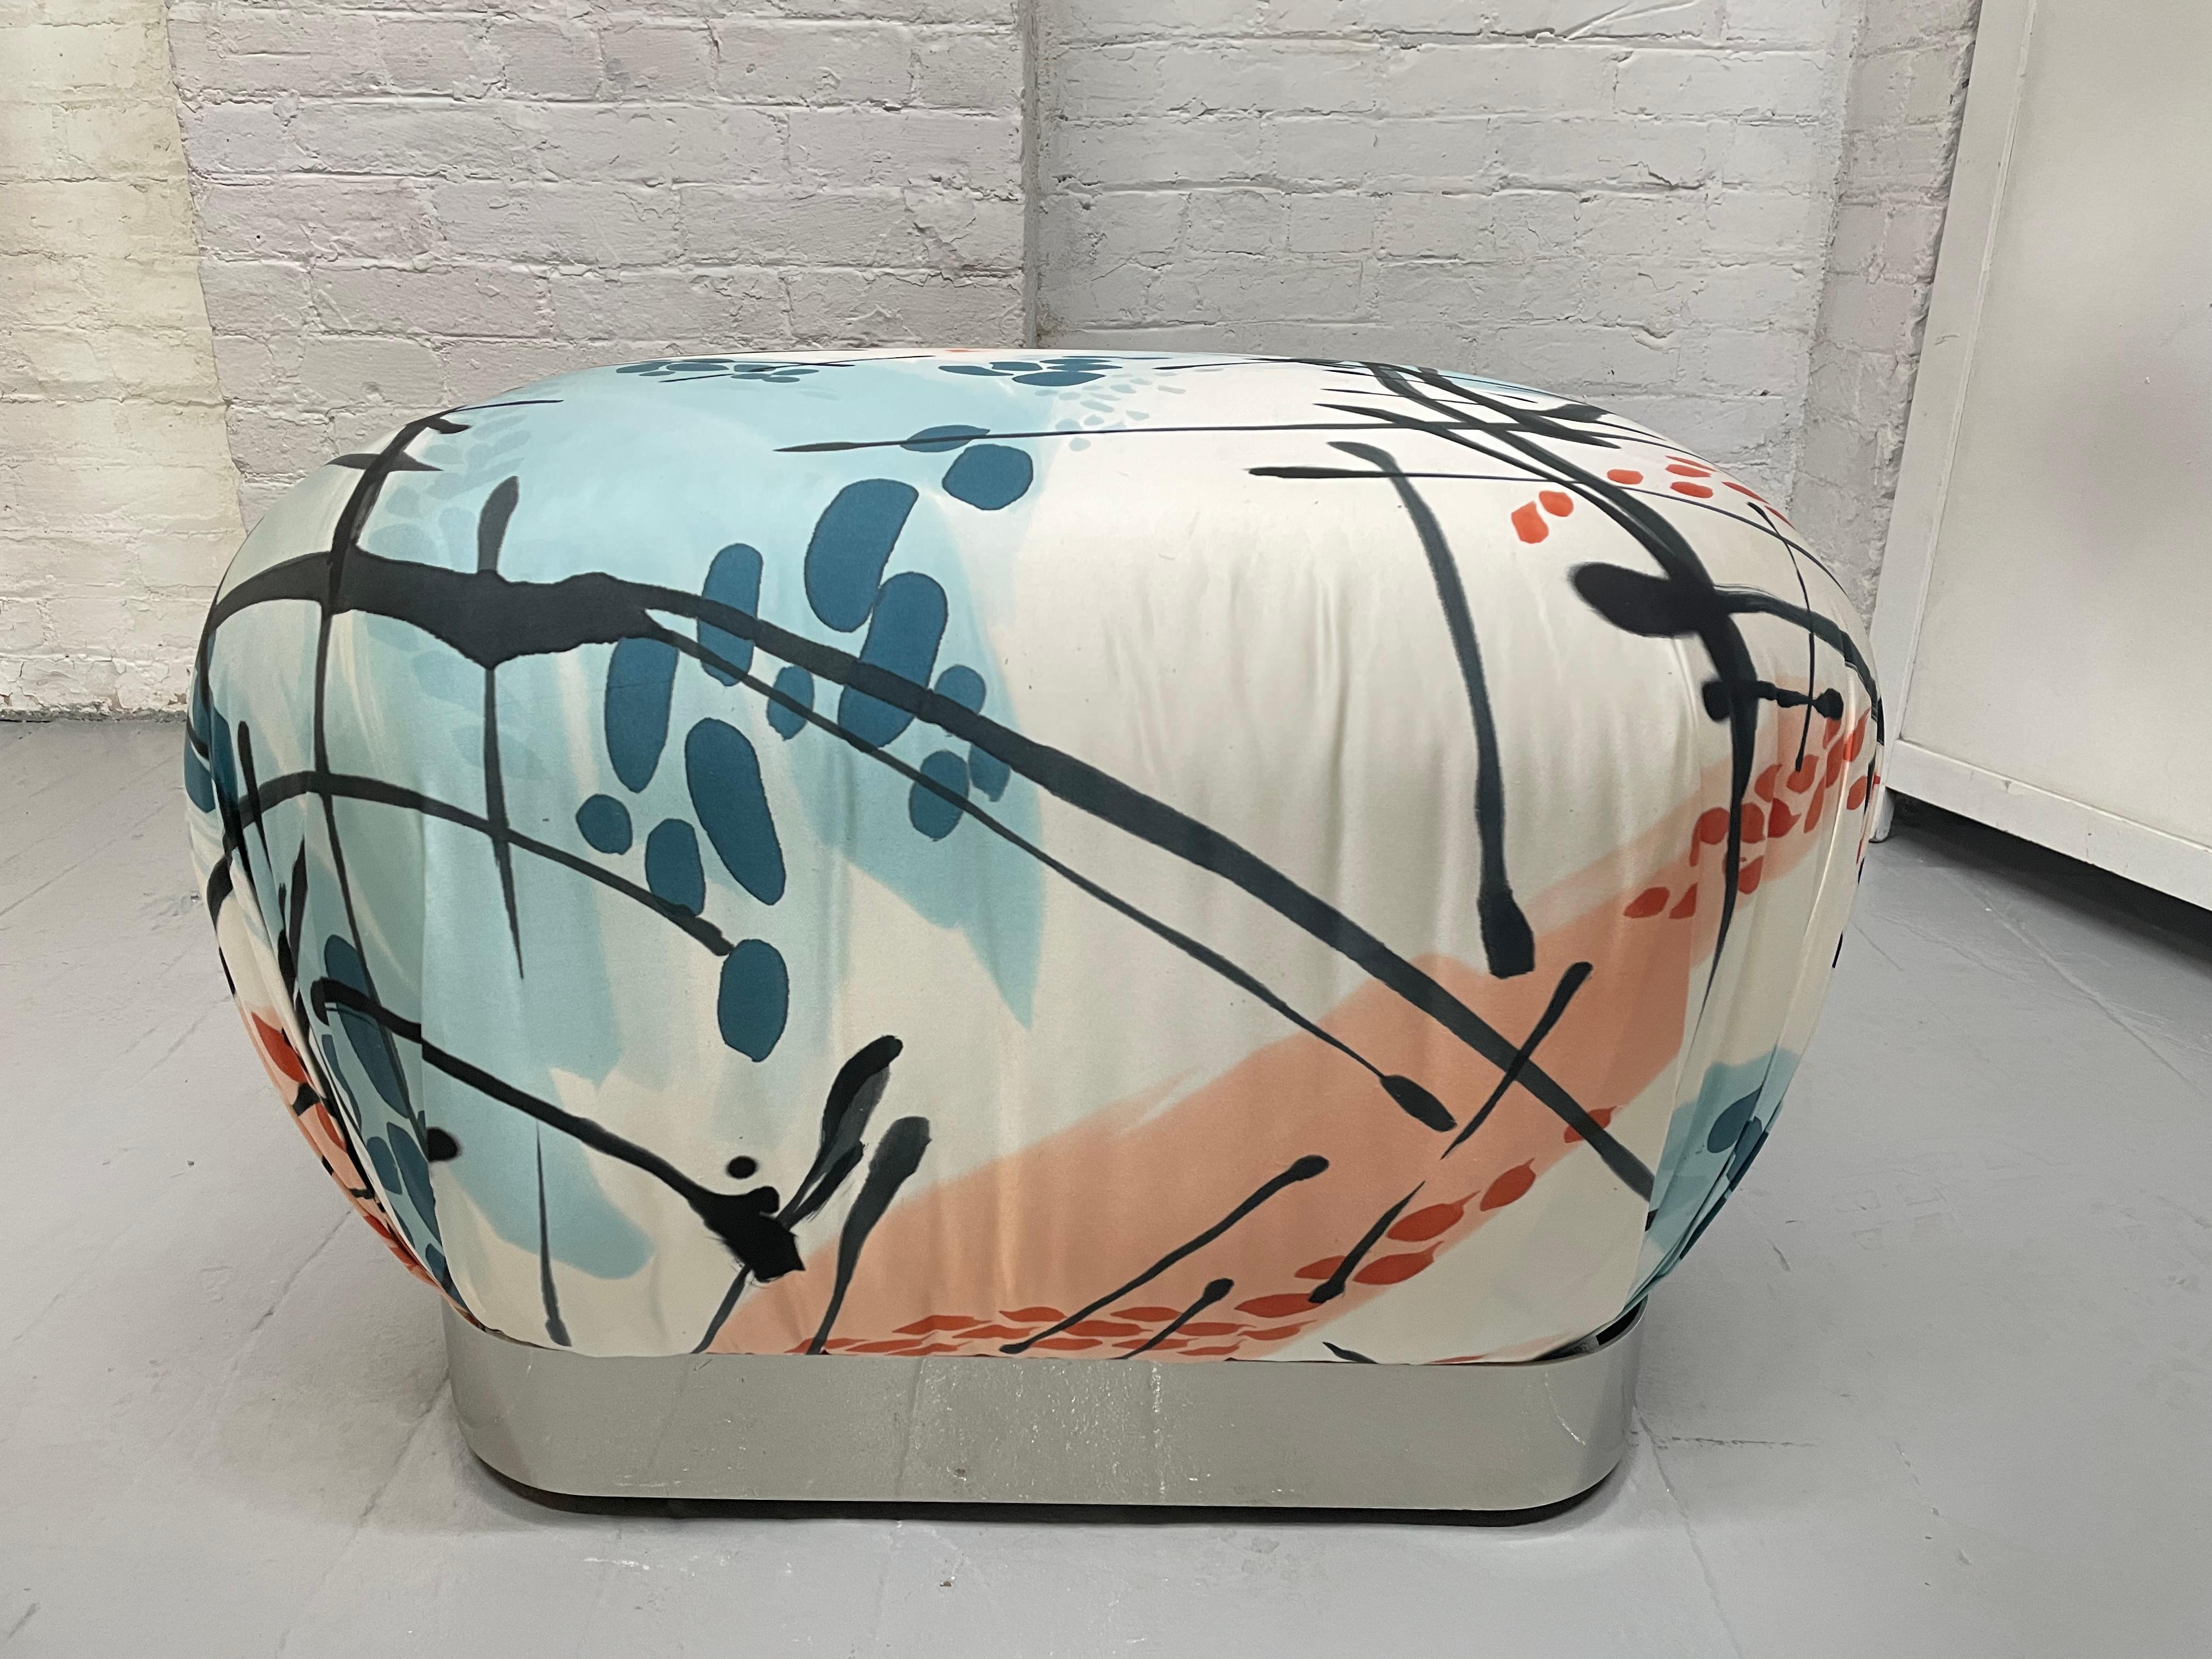 Pair of Karl Springer Souffle Ottomans / Poufs. The bases of the ottomans are brushed steel and upholstered in satin with a hand-painted abstract pattern by artist Michelle Li Murphy. The ottomans also have casters.